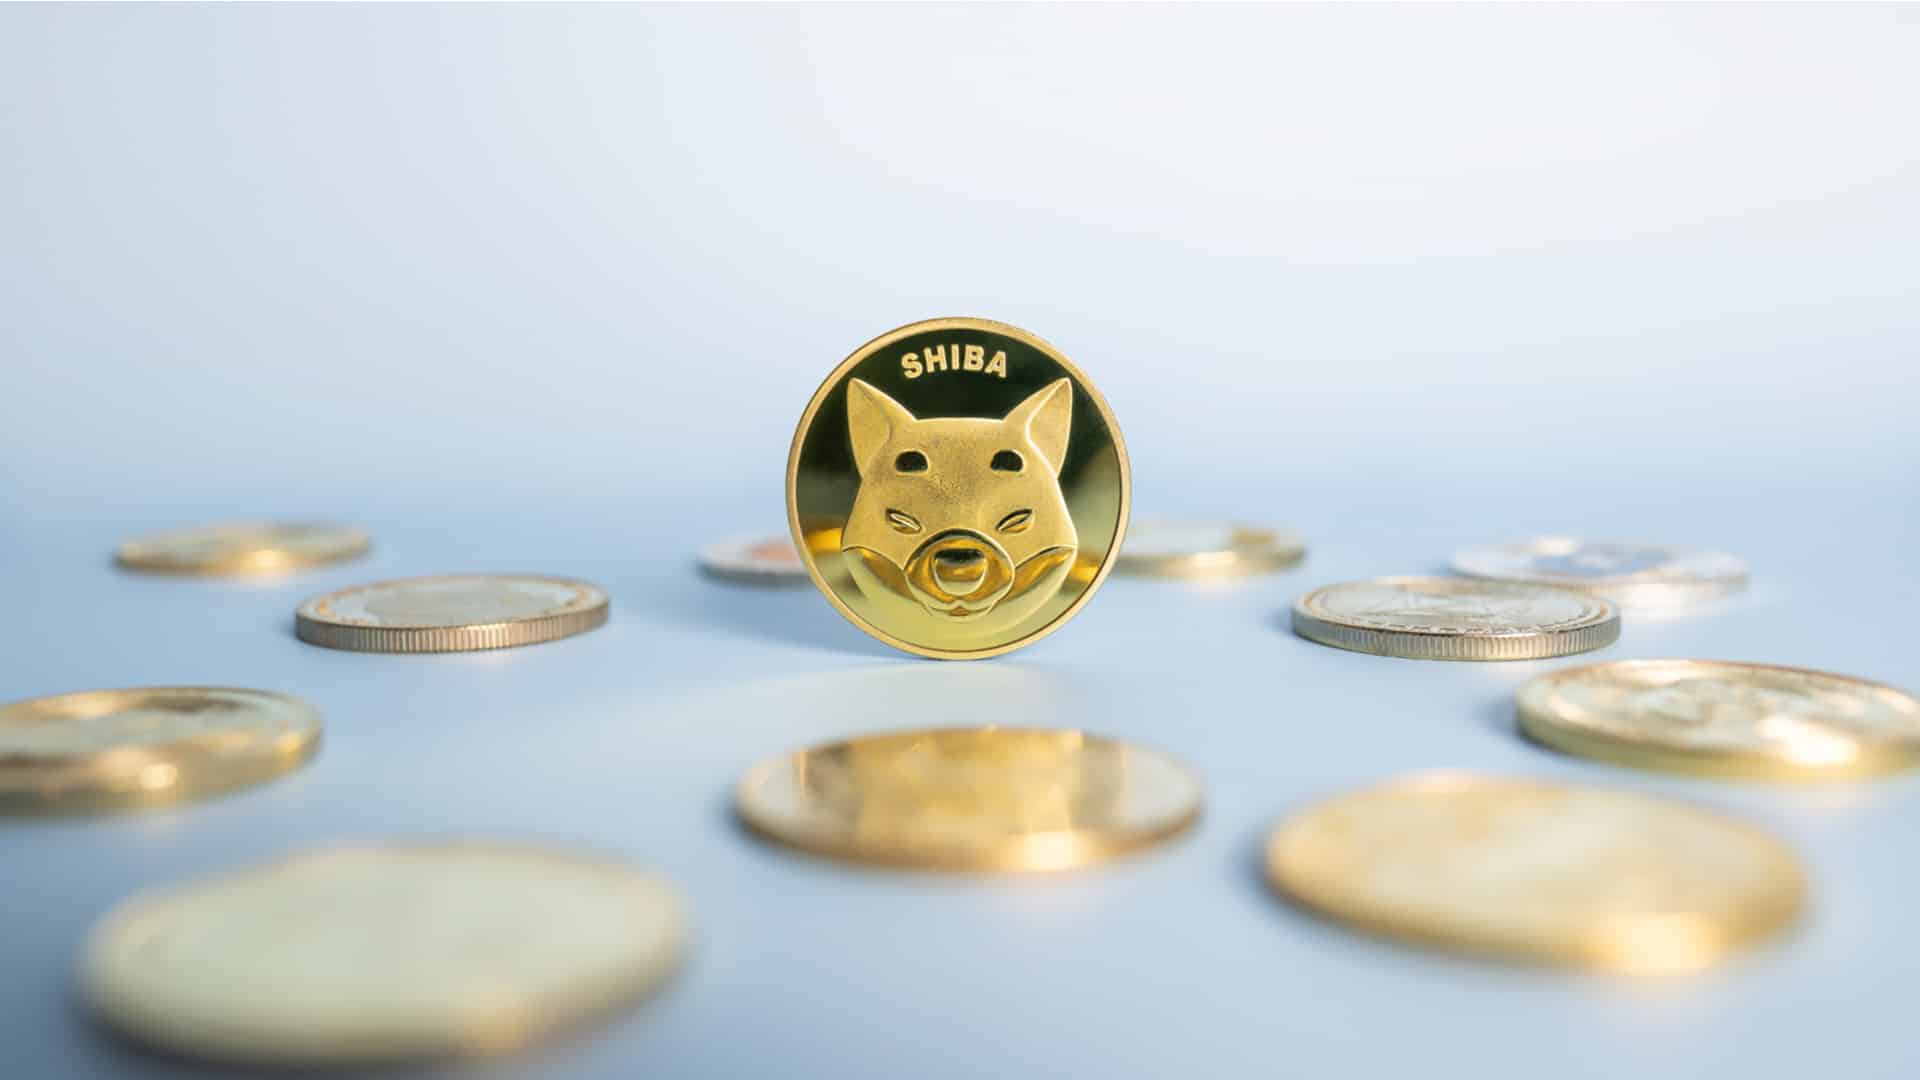 Another whale purchase SHIB tokens worth 1.13 billion – are we waiting for a bullrun?